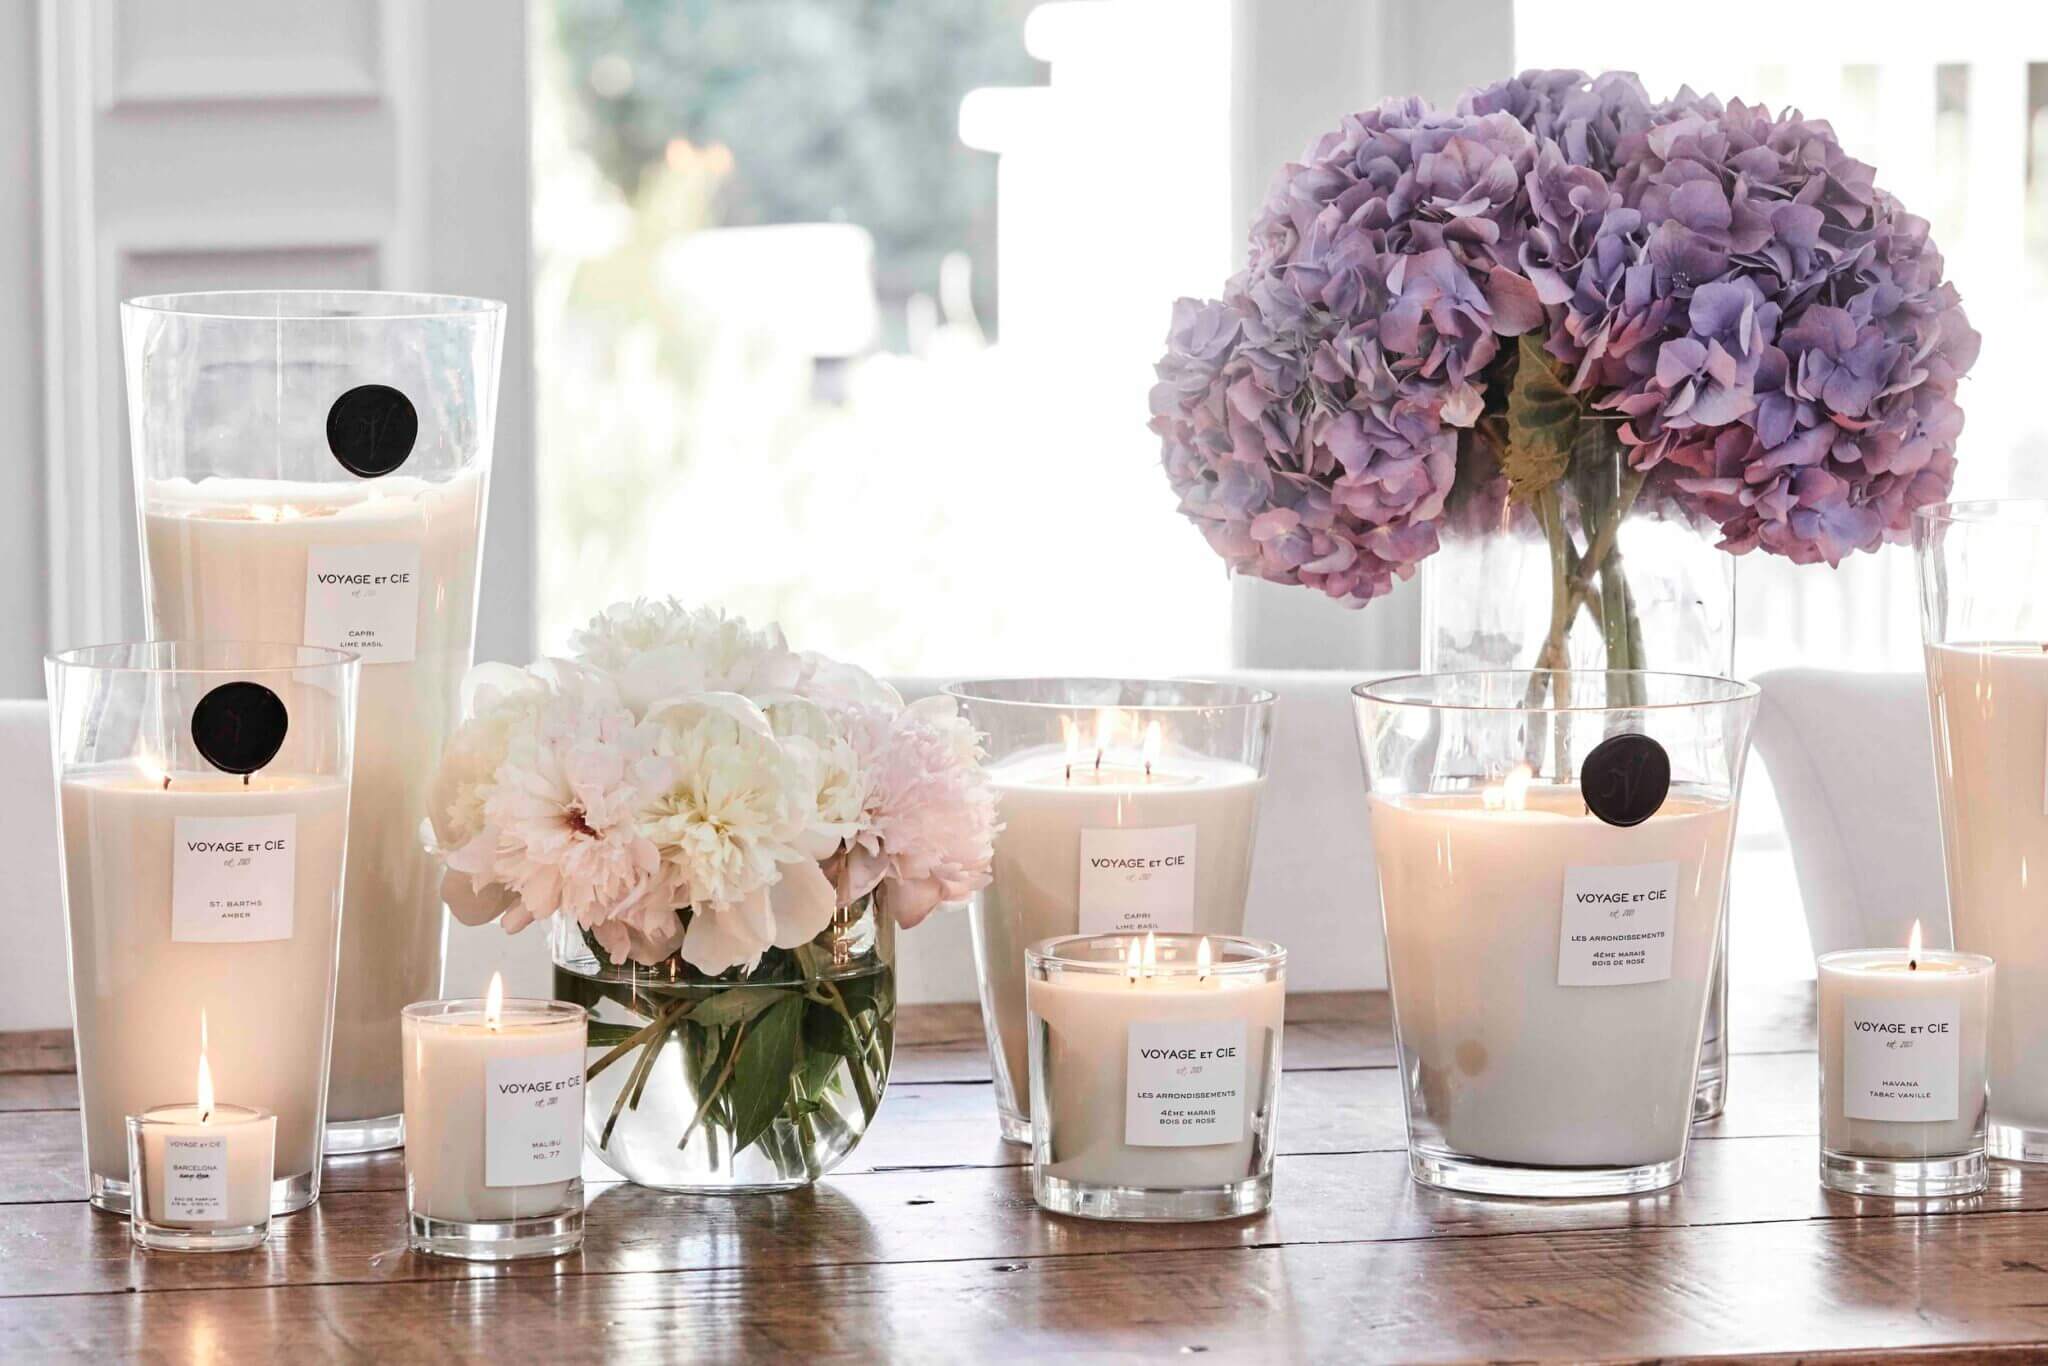 Voyage et Cie Candles at Moondance Jewelry Gallery